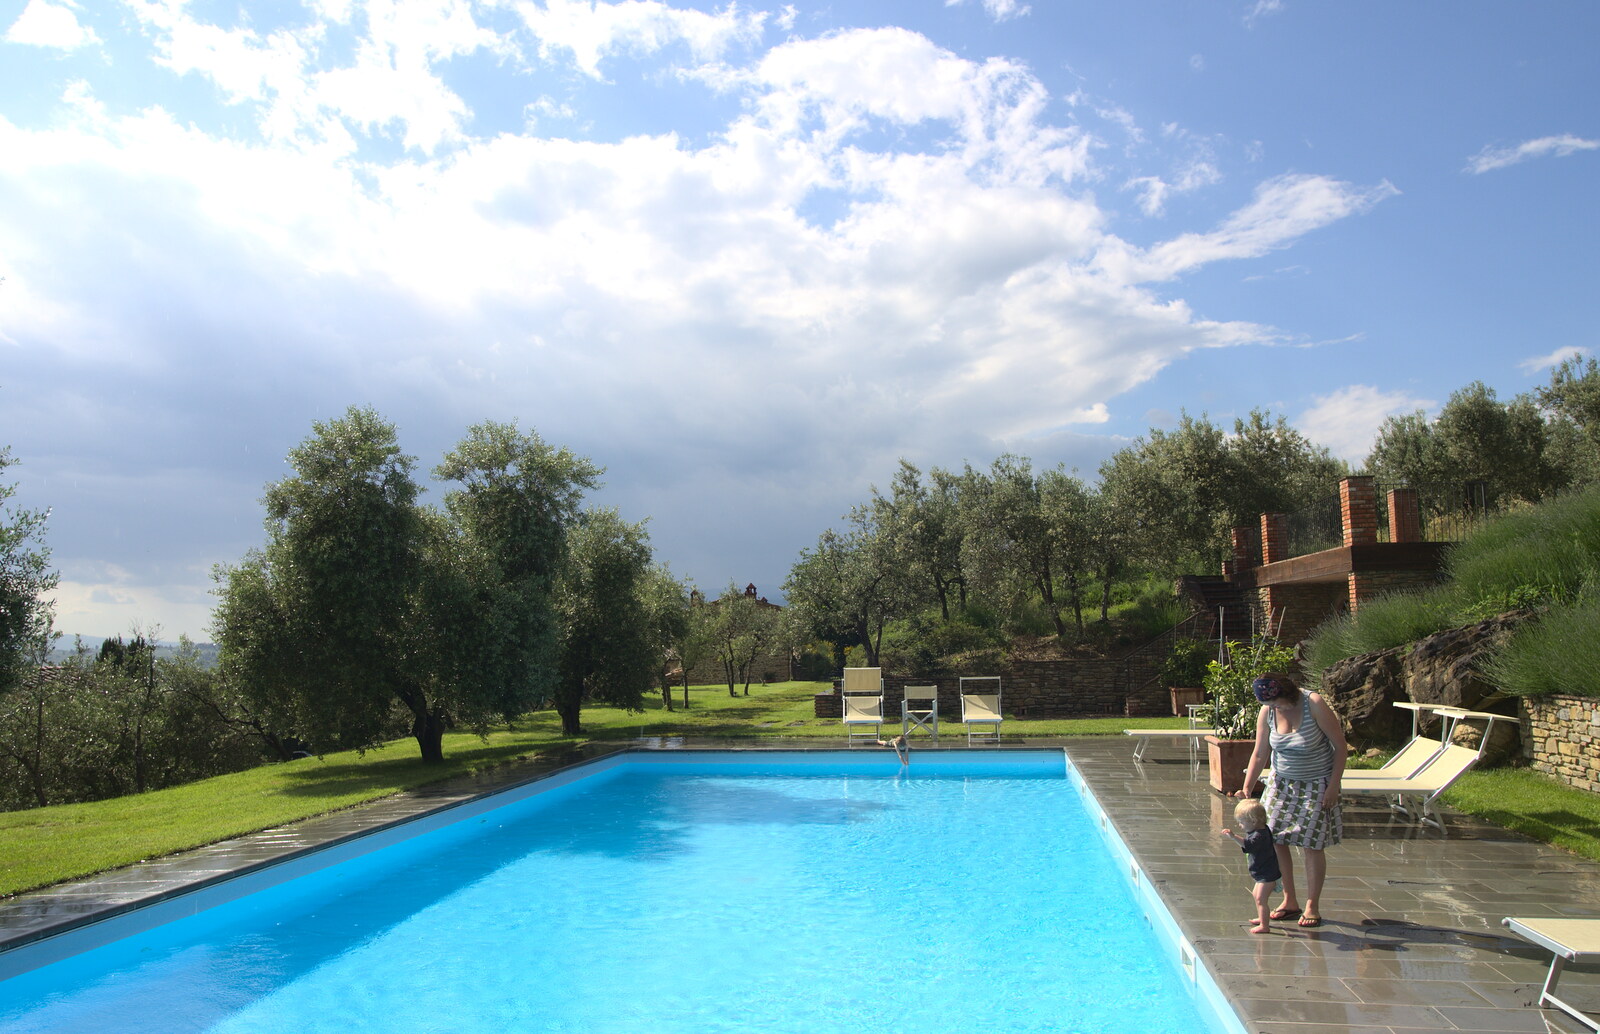 Fred and Isobel on the wet pool-side from Italian Weddings, Saracens and Swimming Pools, Arezzo, Tuscany - 12th June 2013